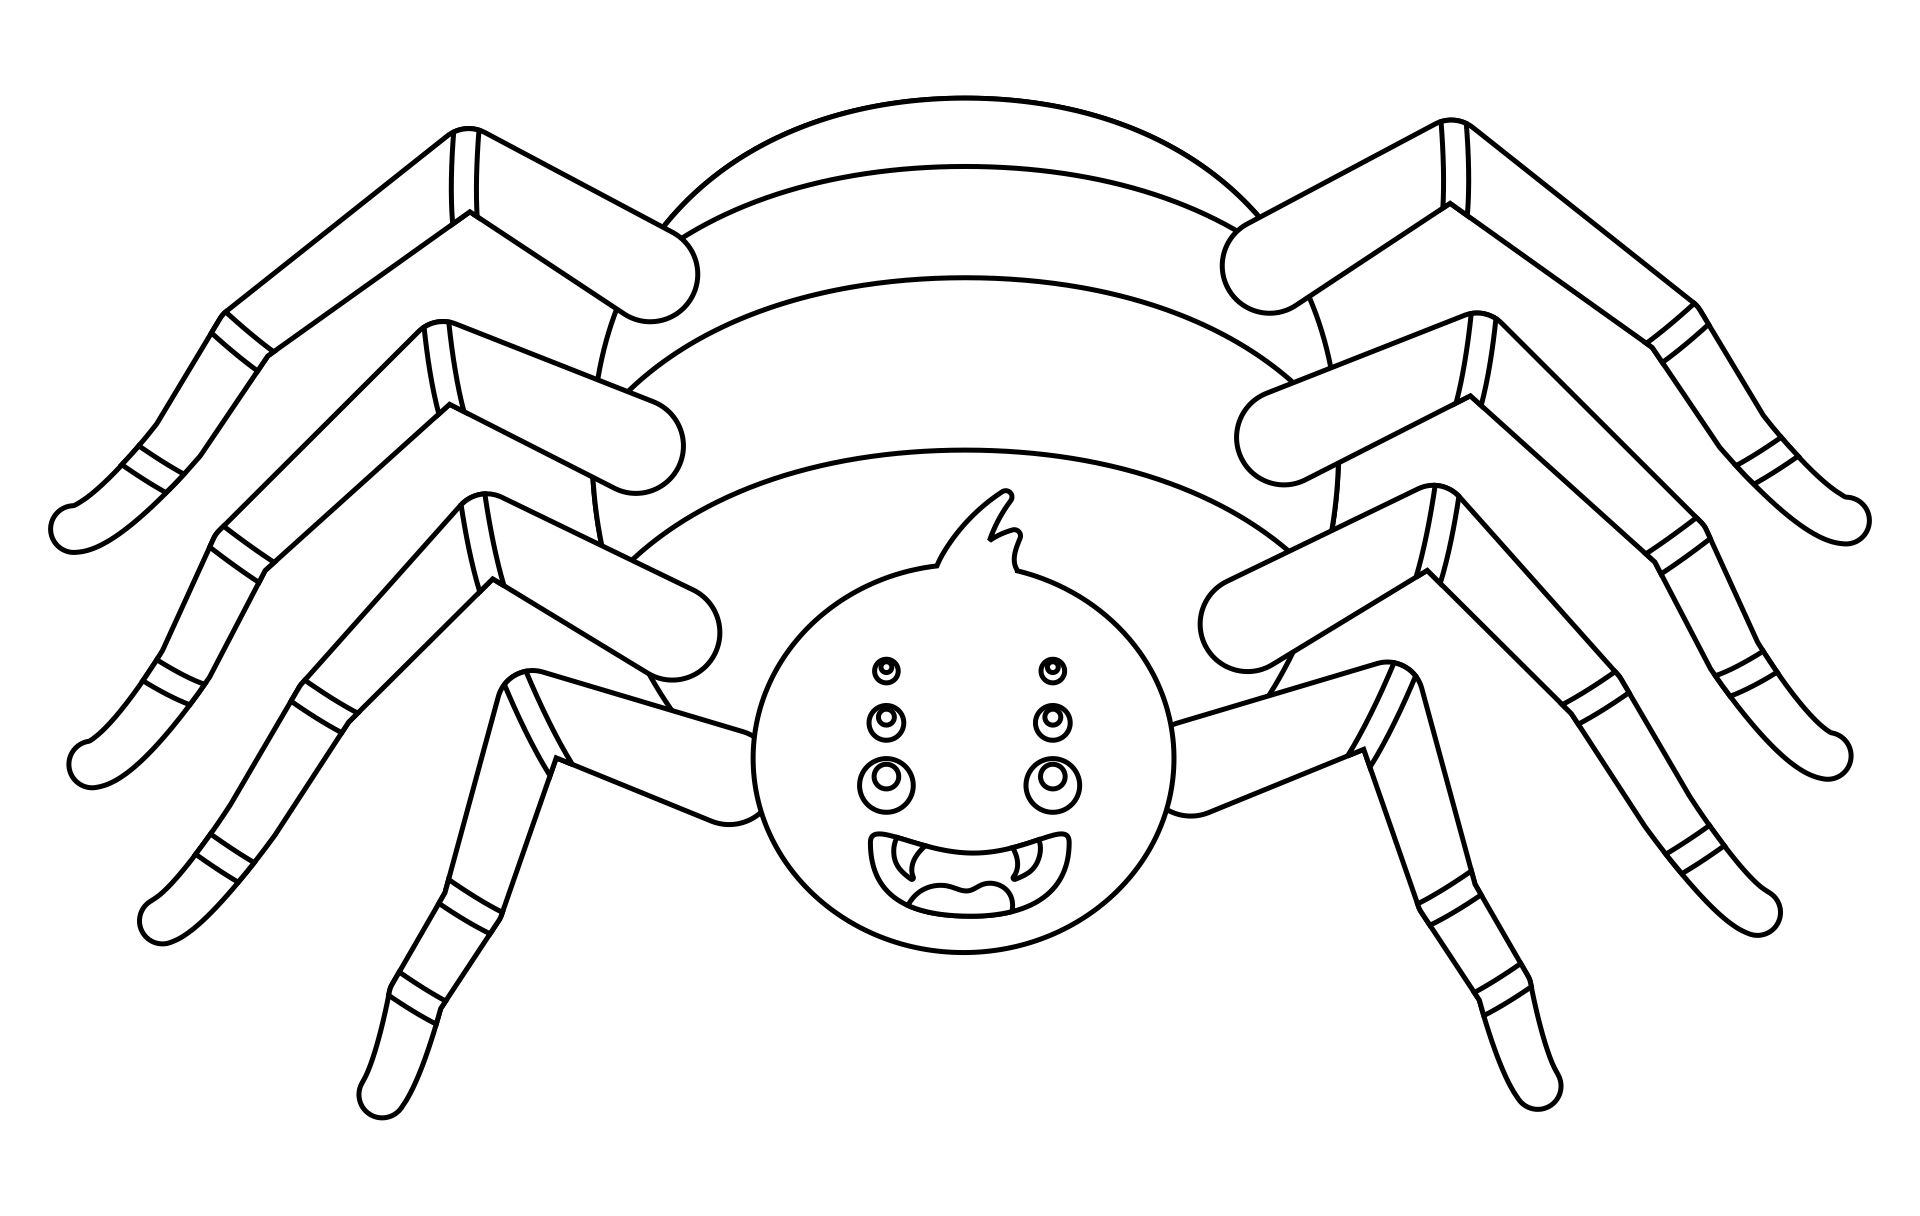 Funny Spider Coloring Pages PDF To Print